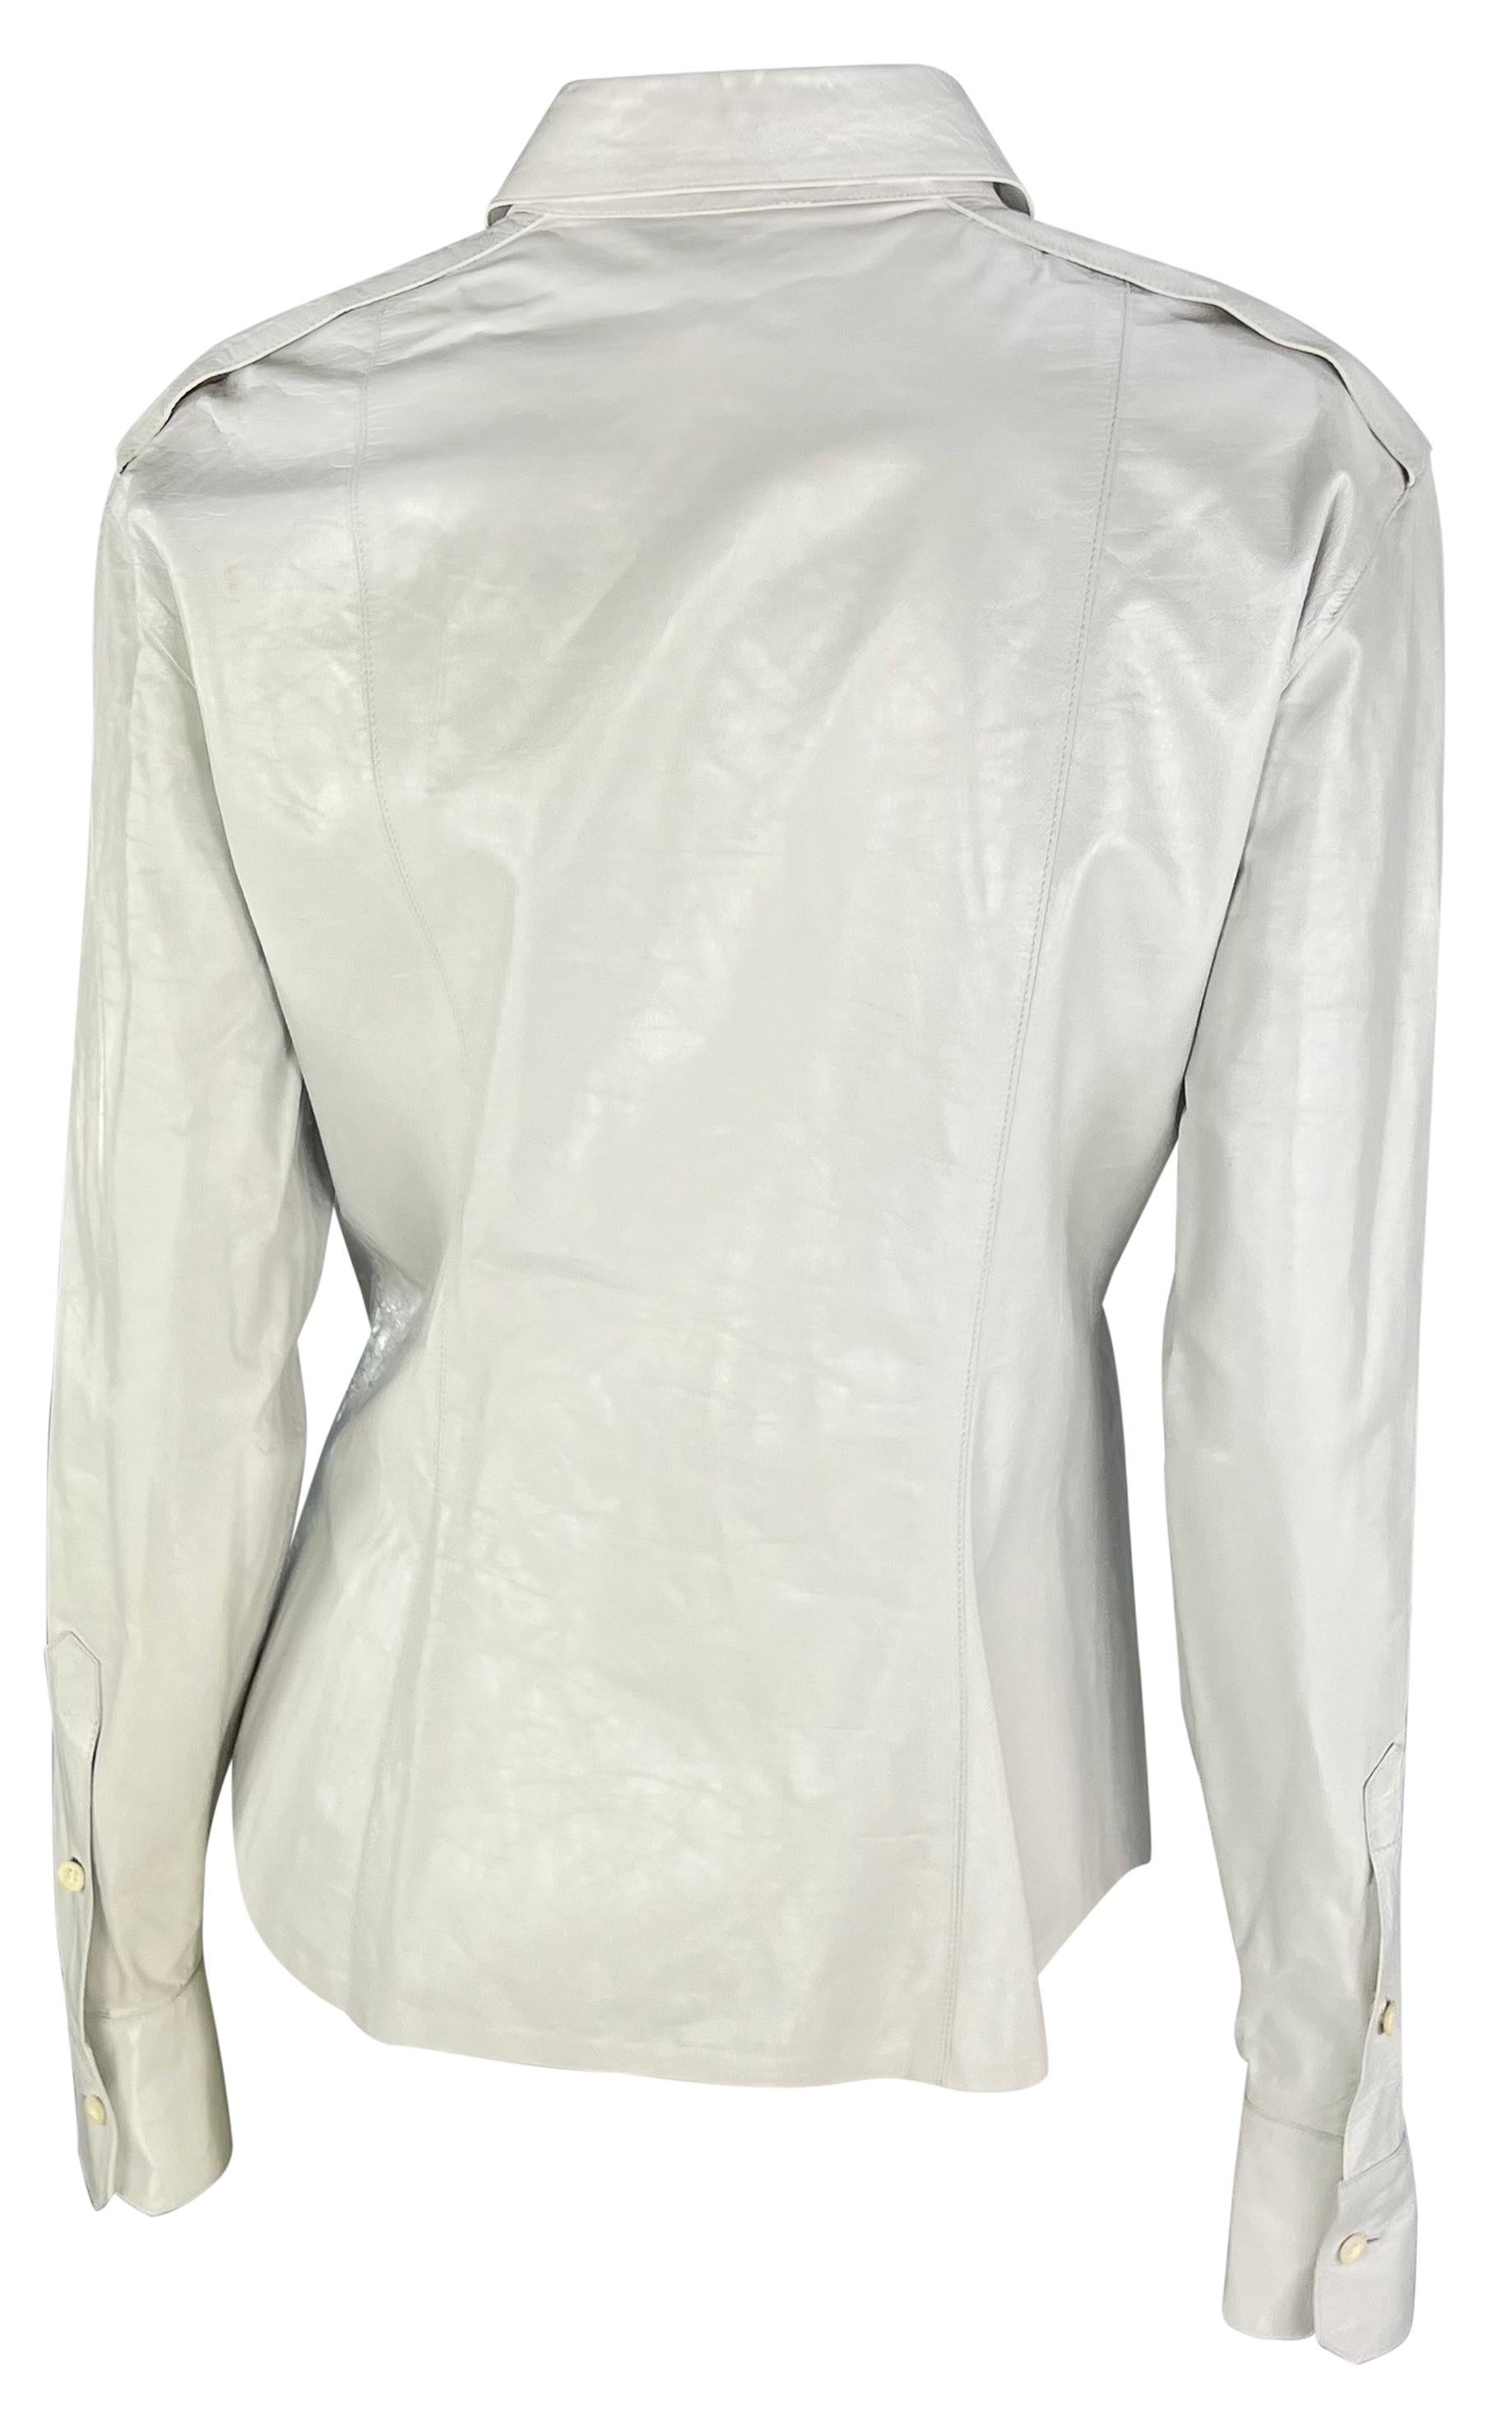 Women's S/S 2001 Gucci by Tom Ford White Leather Button Down Shirt For Sale